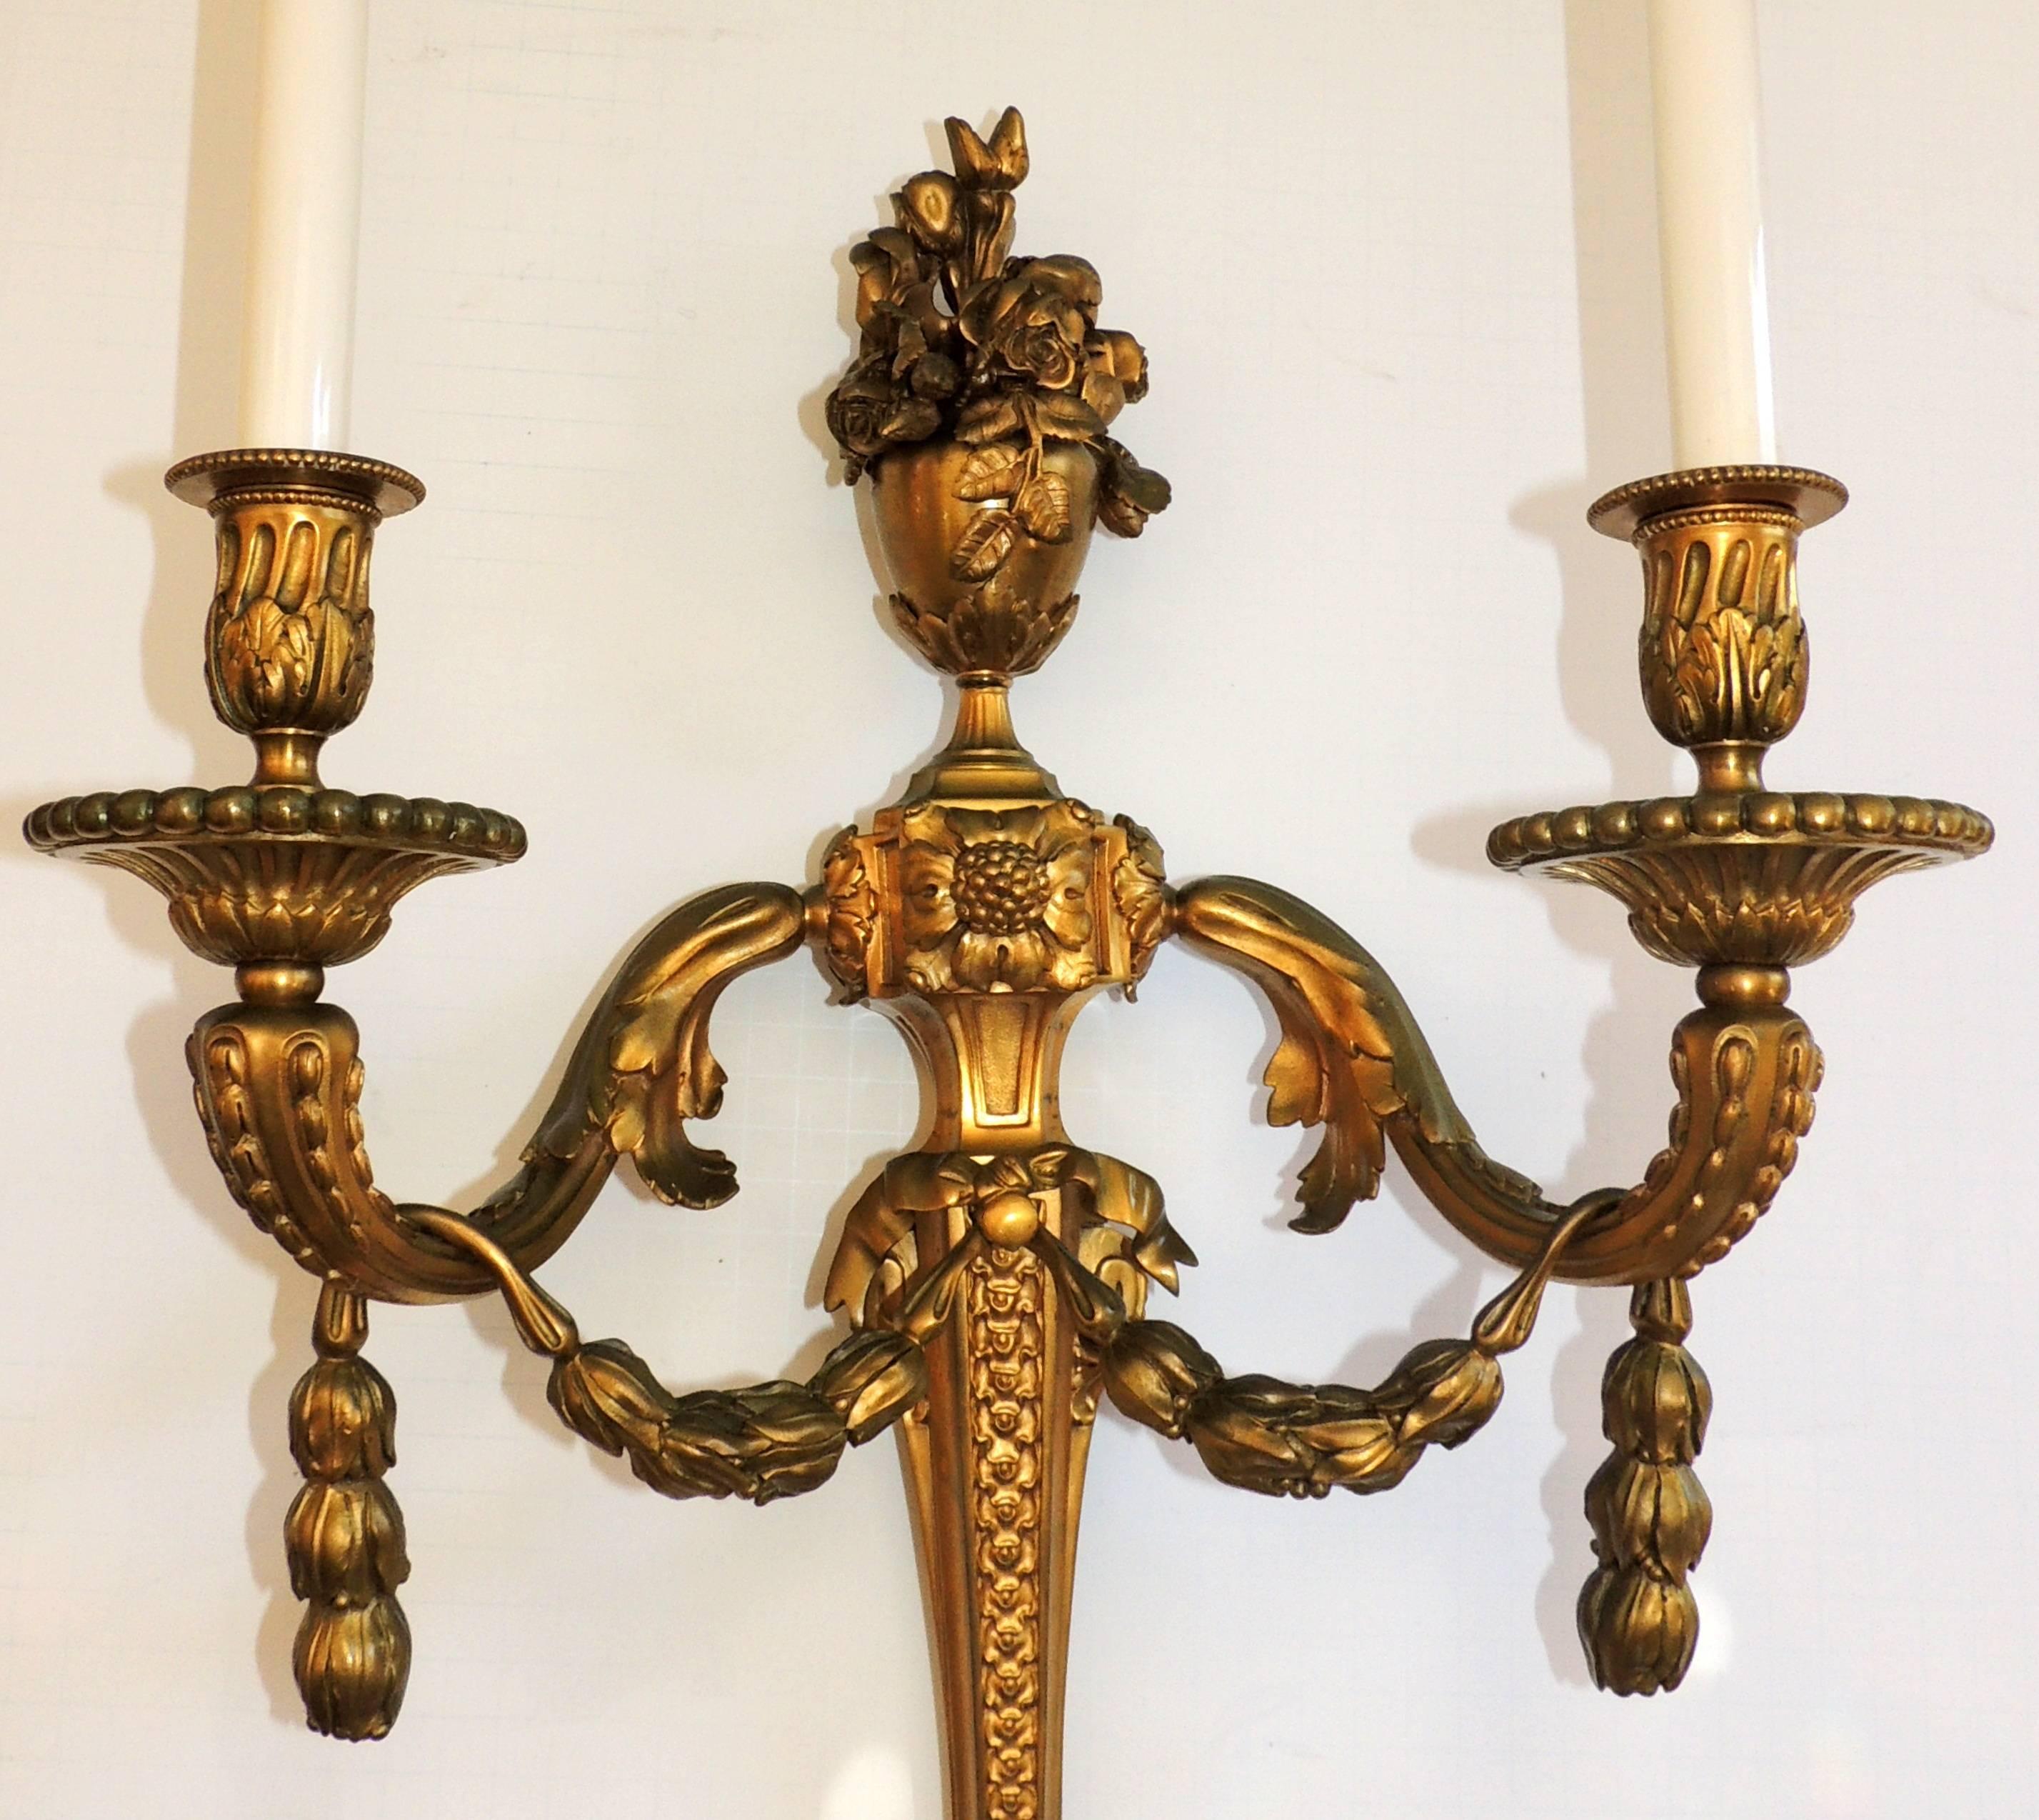 A large and wonderful pair of two-arm French doré bronze urn and floral crown top garland swag sconces, with new sockets and wires
Come with mounting hardware, ready to install and enjoy.